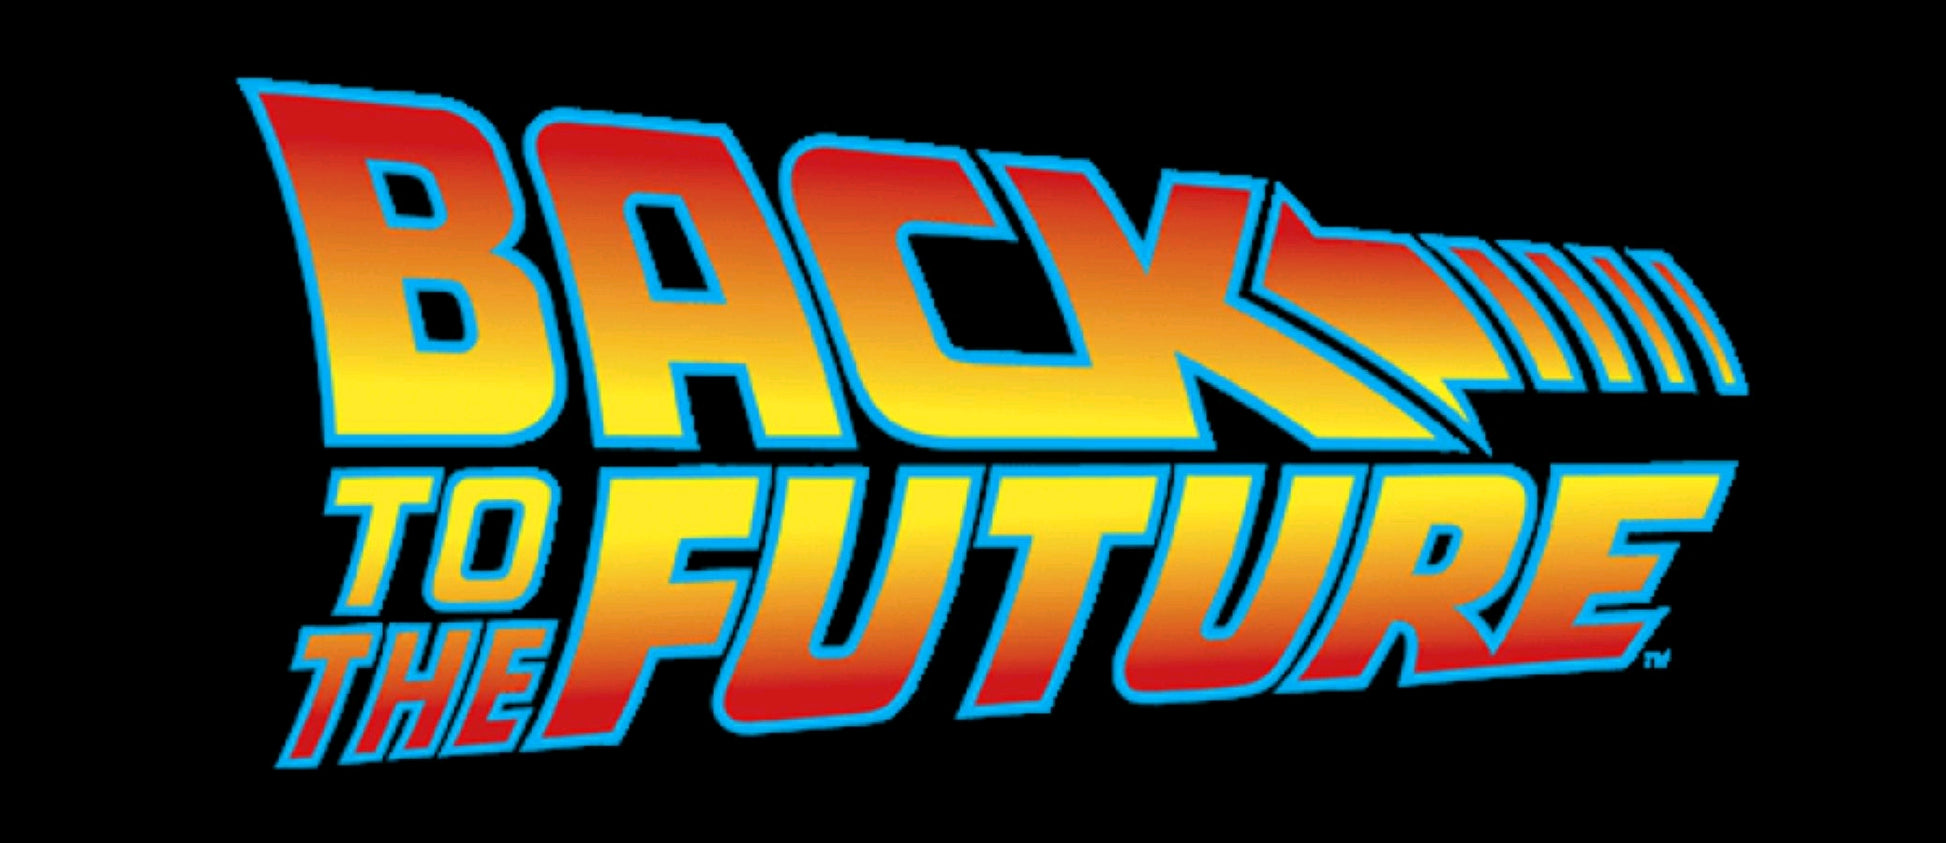 Back to the Future 2 - Biff Cosbaby